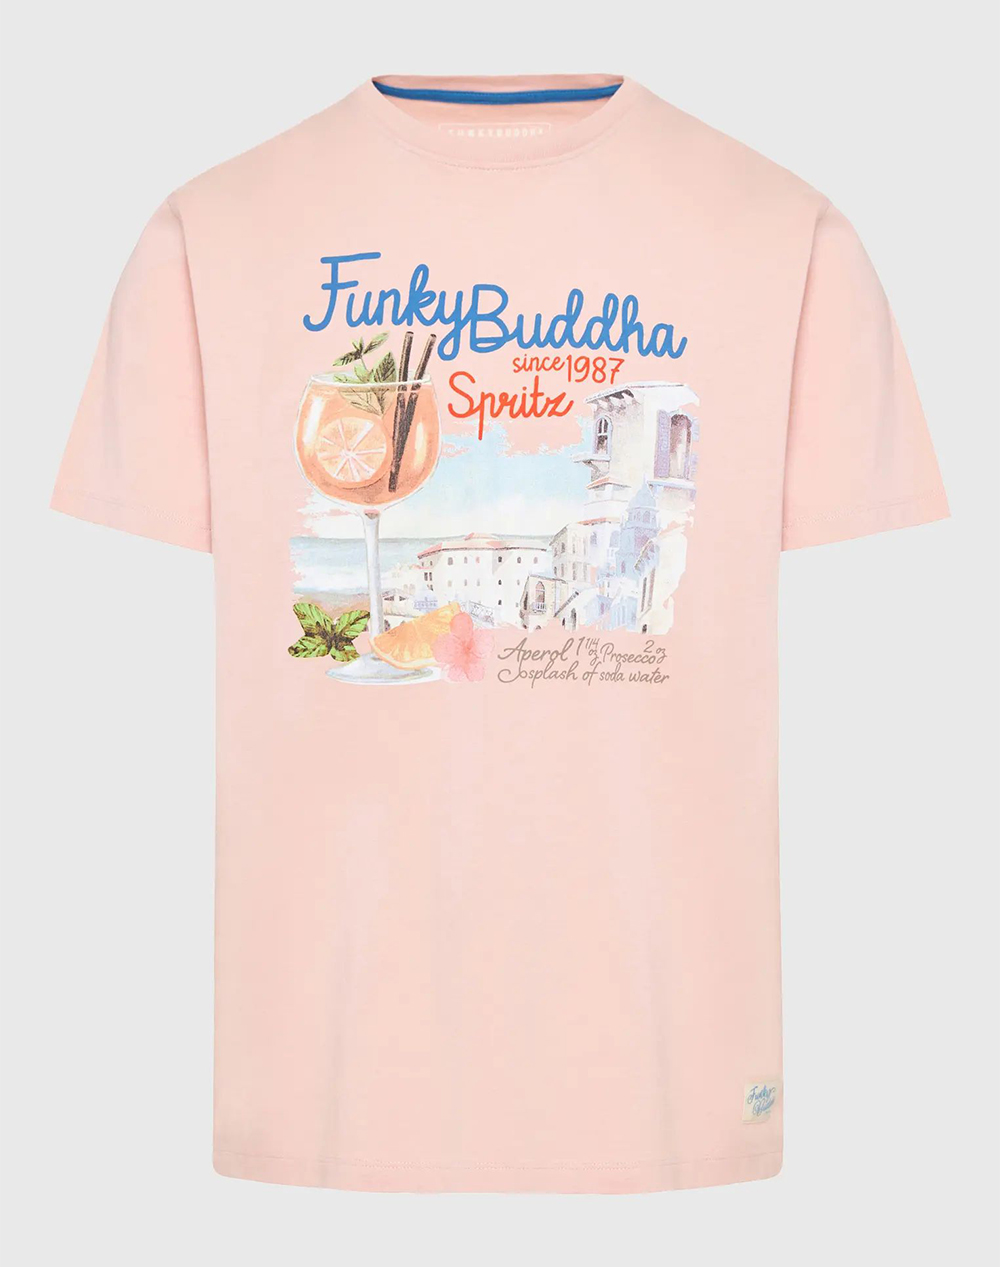 FUNKY BUDDHA T-shirt με vintage coctail τύπωμα FBM009-086-04-CORAL PINK Coral 3820TFUNK3400246_XR30155